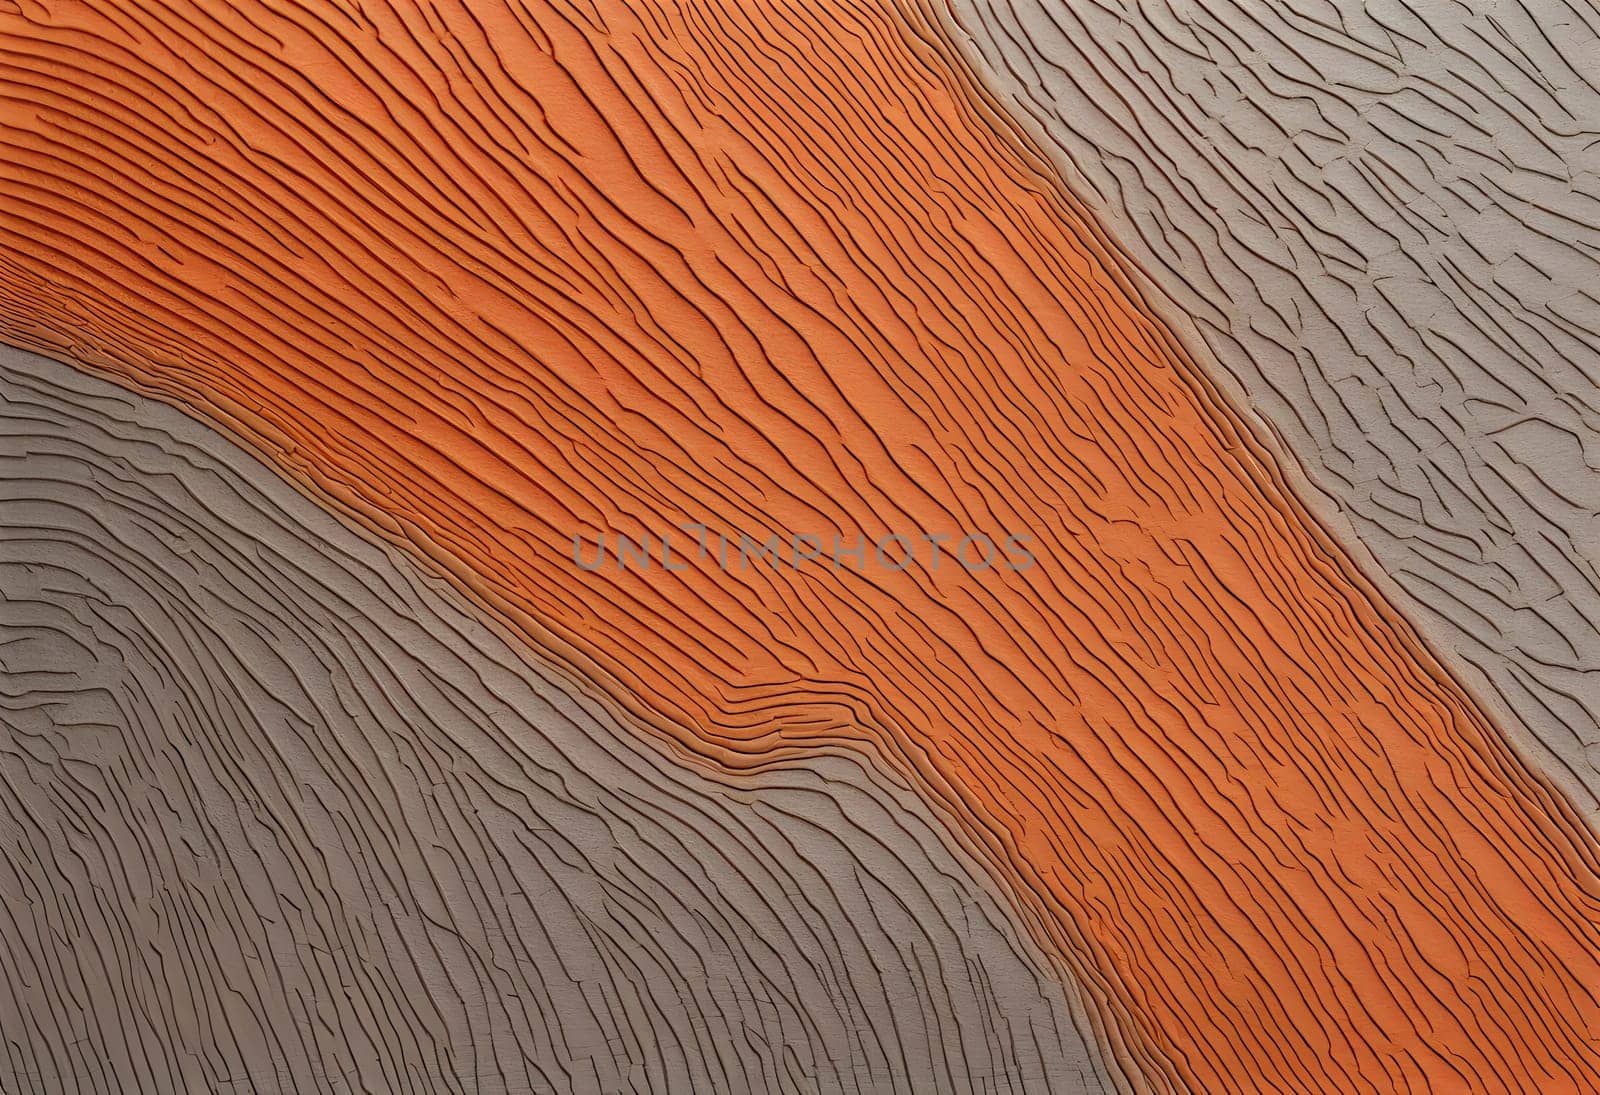 close-up of textured surface with orange lines, ultra-fine close-up picture, woodcut, high detail by rostik924